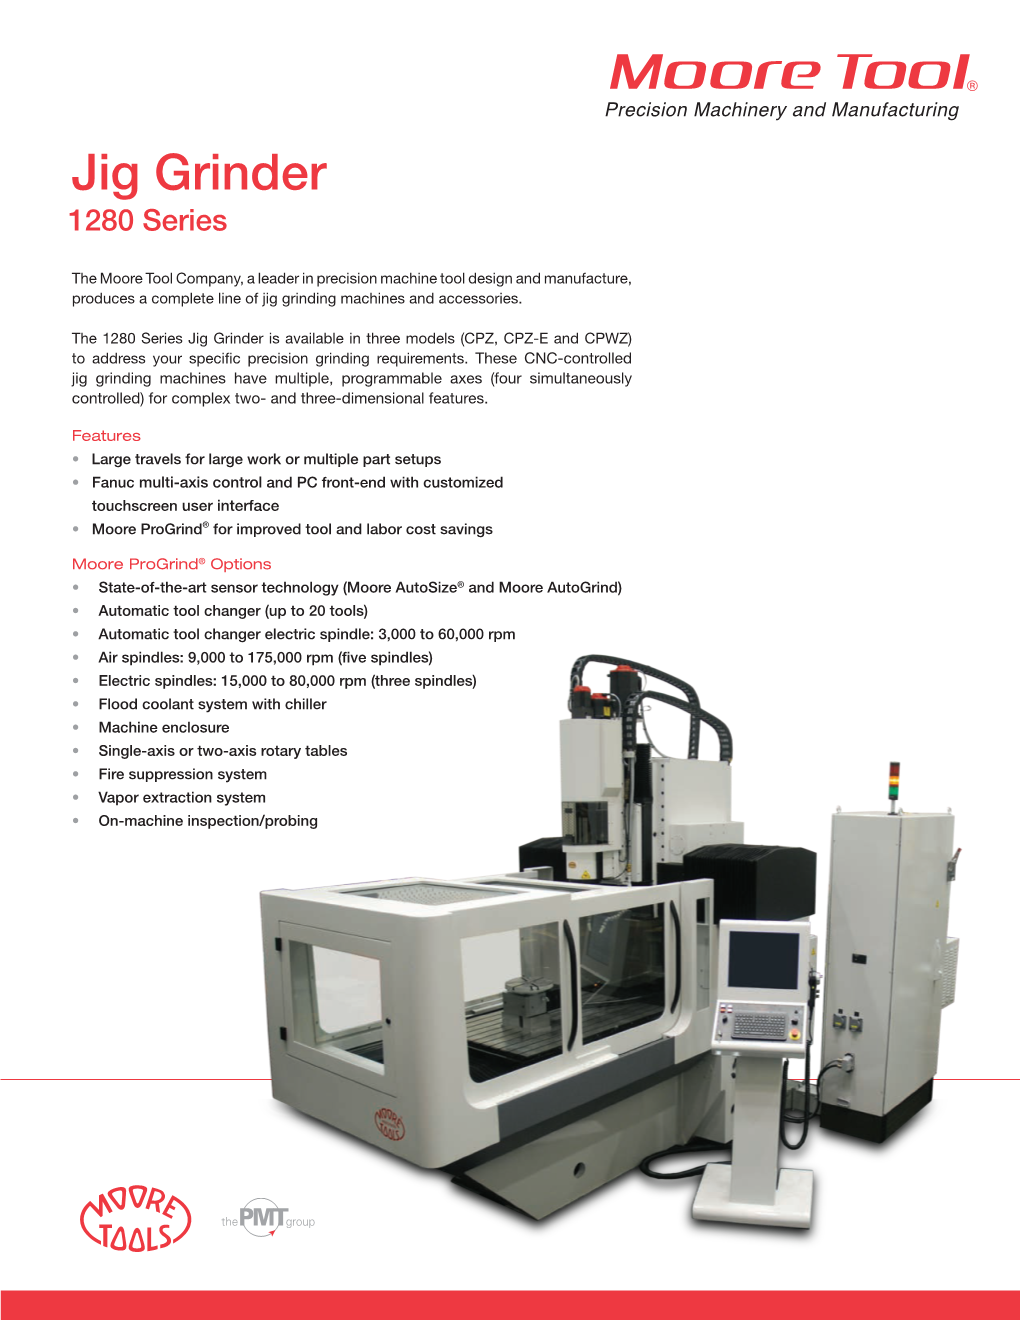 1280 Series Jig Grinder Is Available in Three Models (CPZ, CPZ-E and CPWZ) to Address Your Specific Precision Grinding Requirements